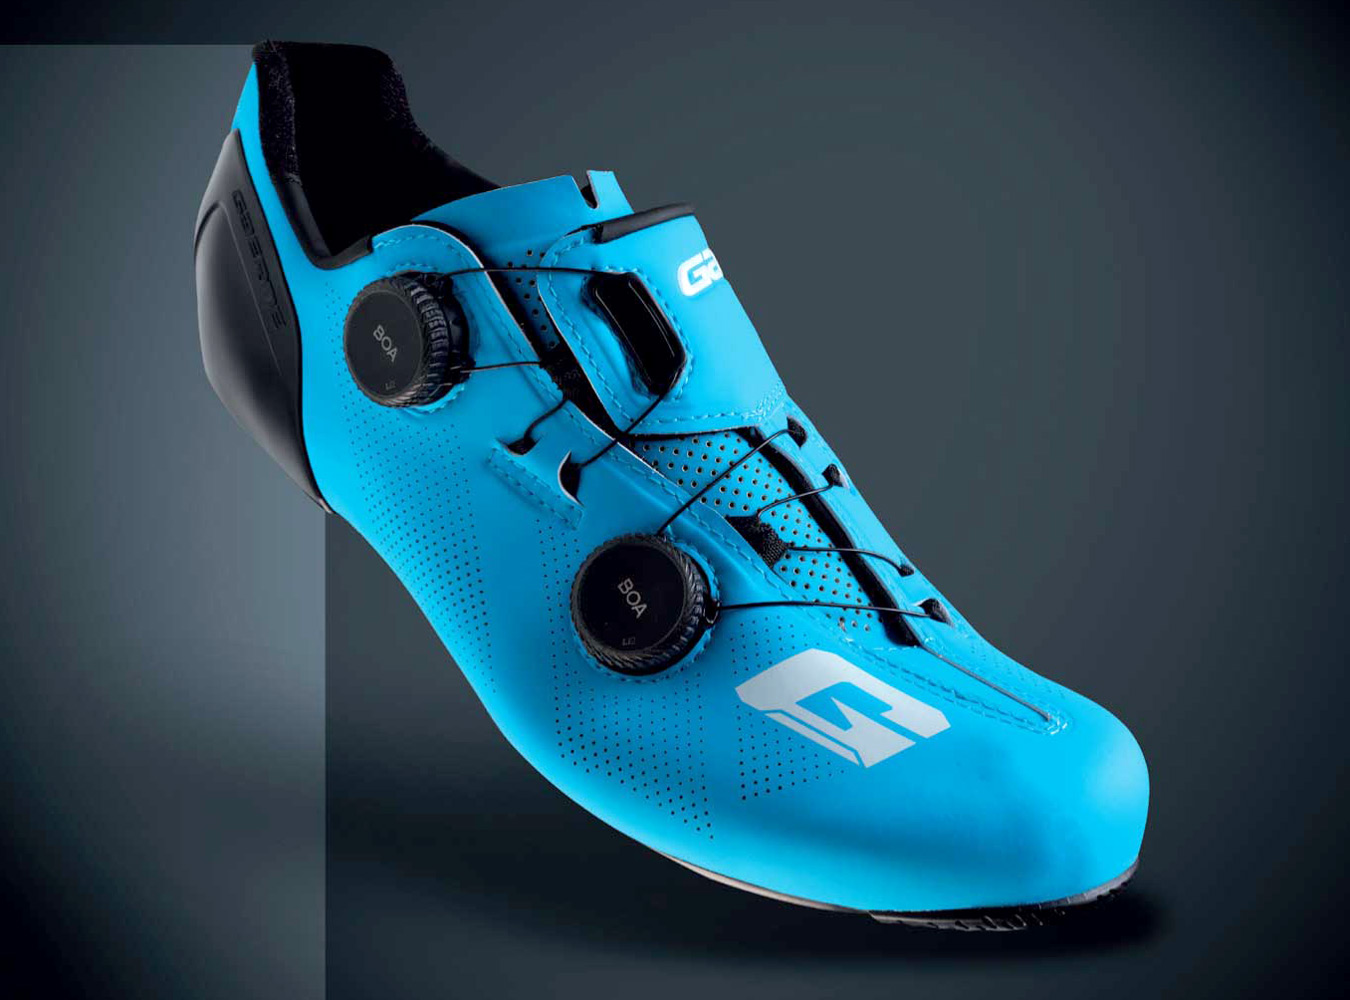 Gaerne-G.STL-road-shoes_top-tier-made-in-Italy-performance-carbon-road-race-bike-shoe_angled-top.jpg